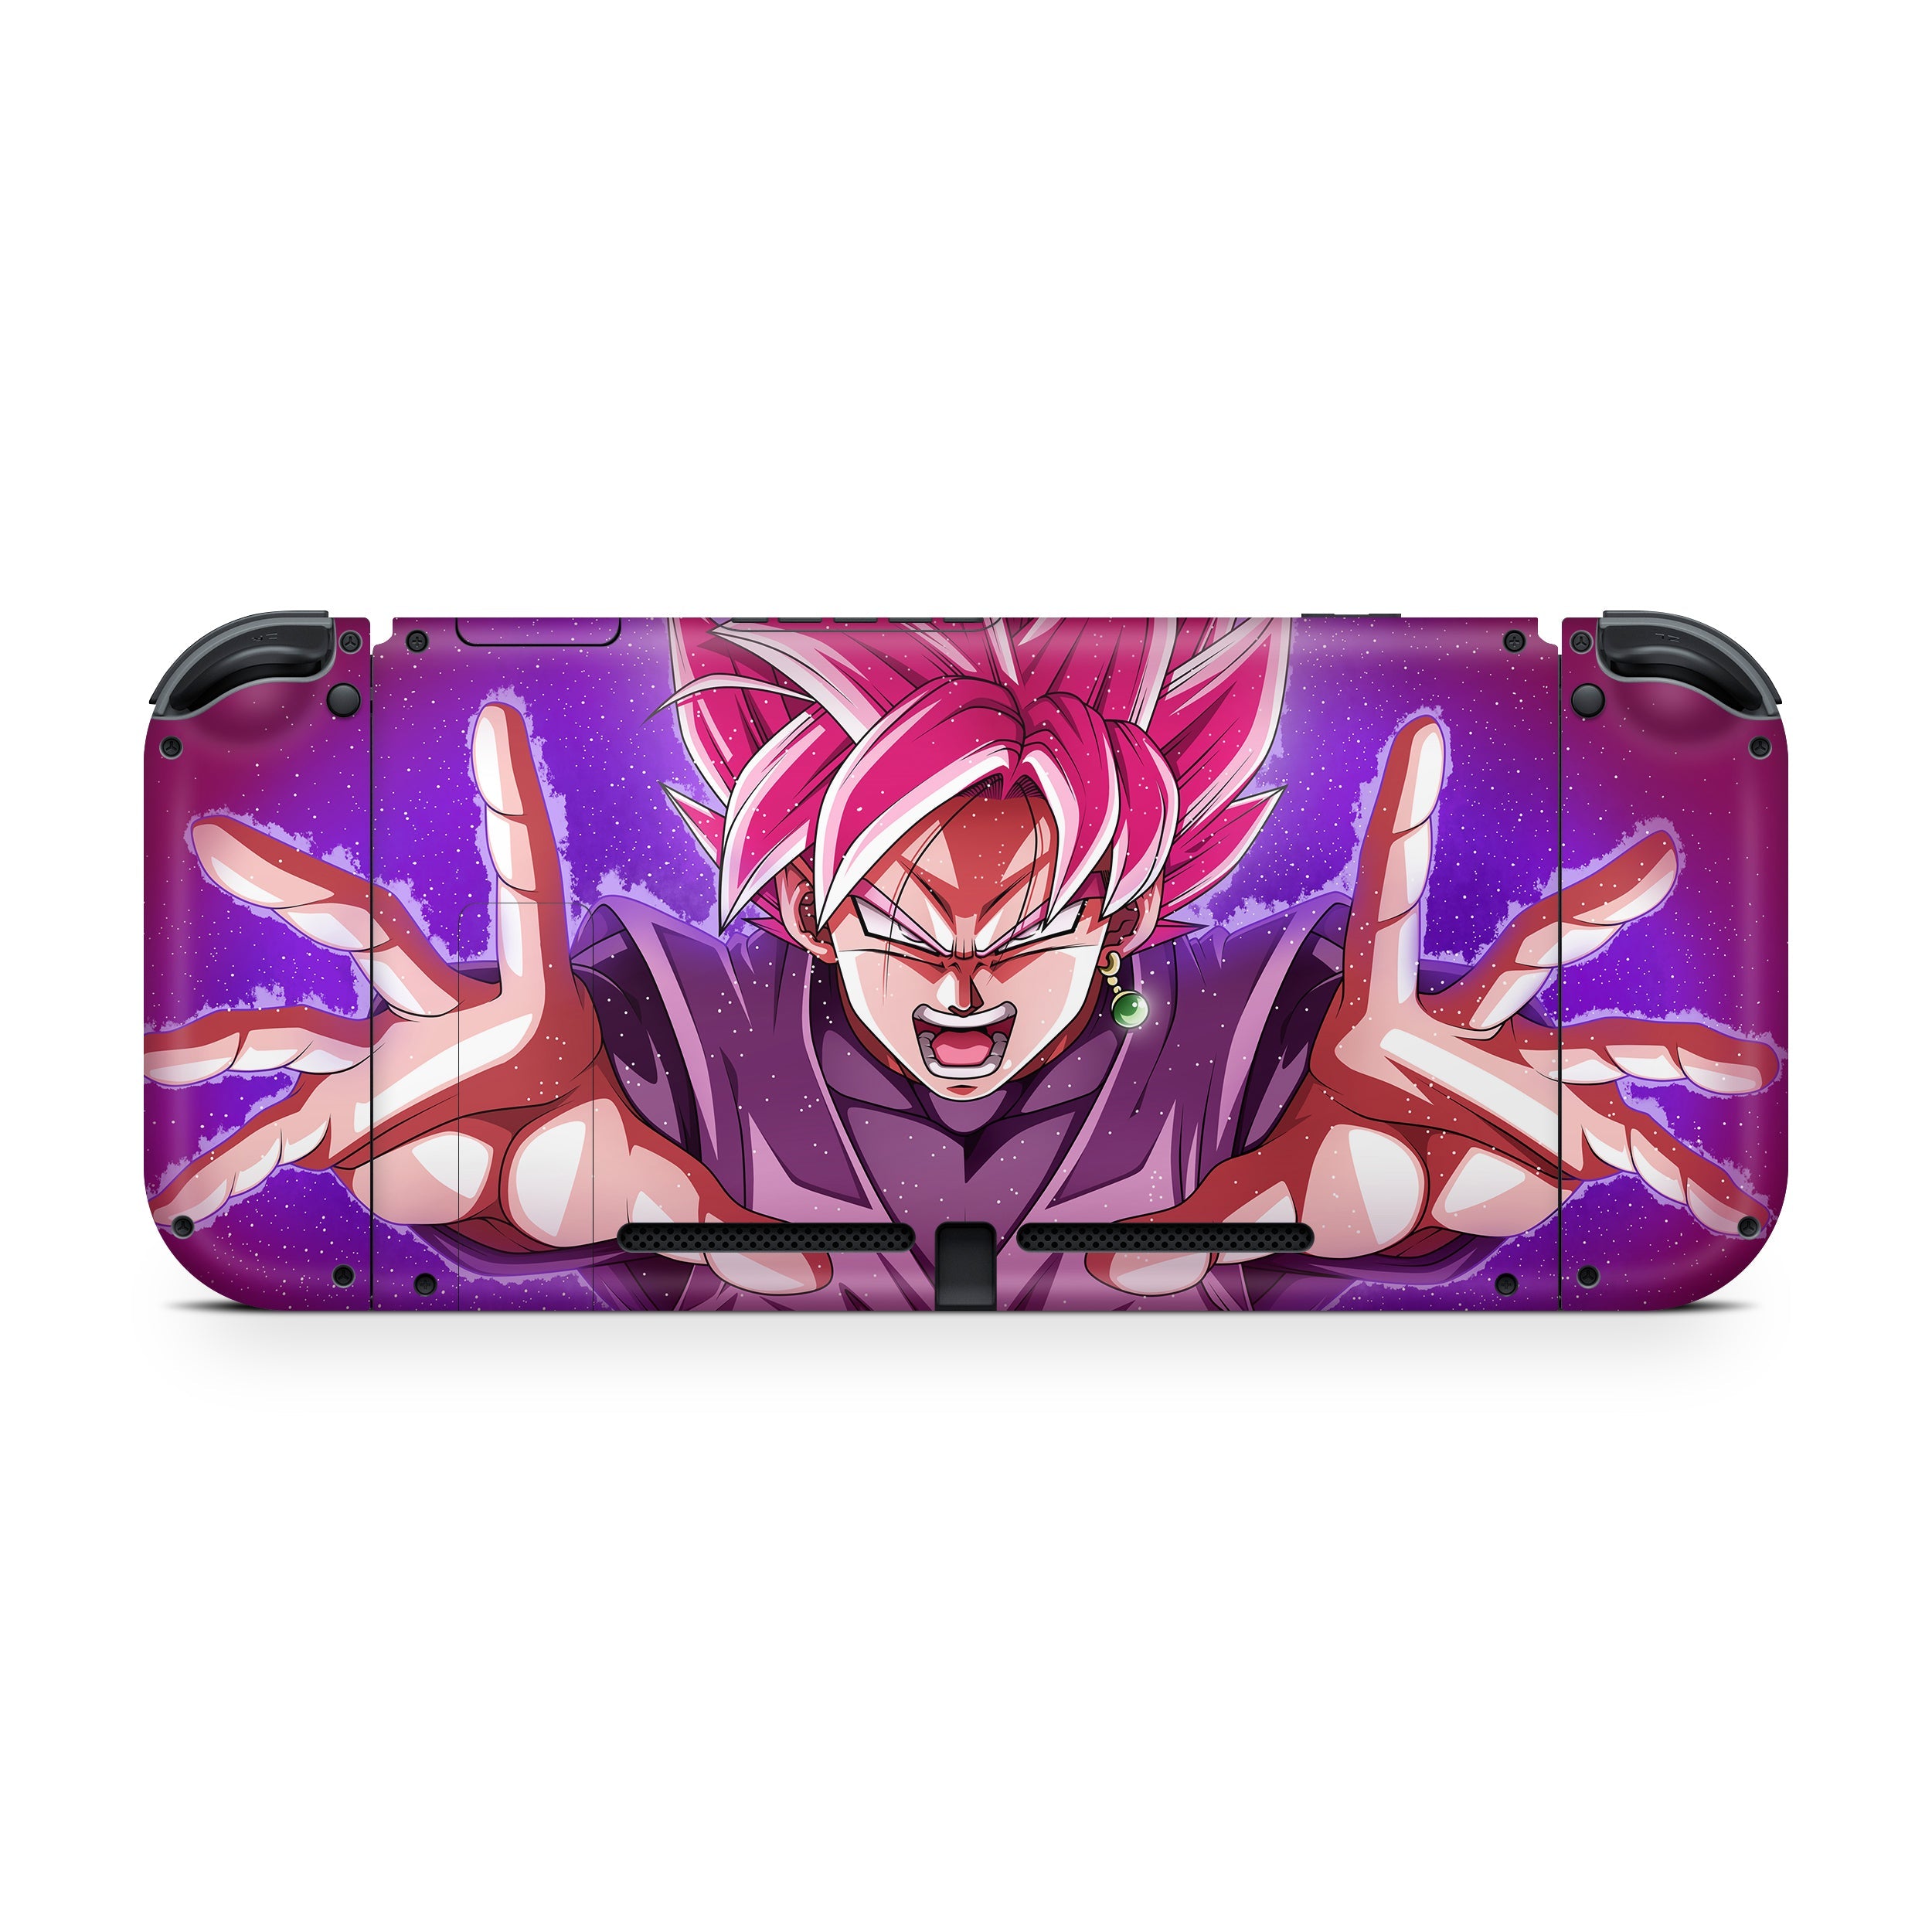 A video game skin featuring a Dragon Ball Super Goku design for the Nintendo Switch.